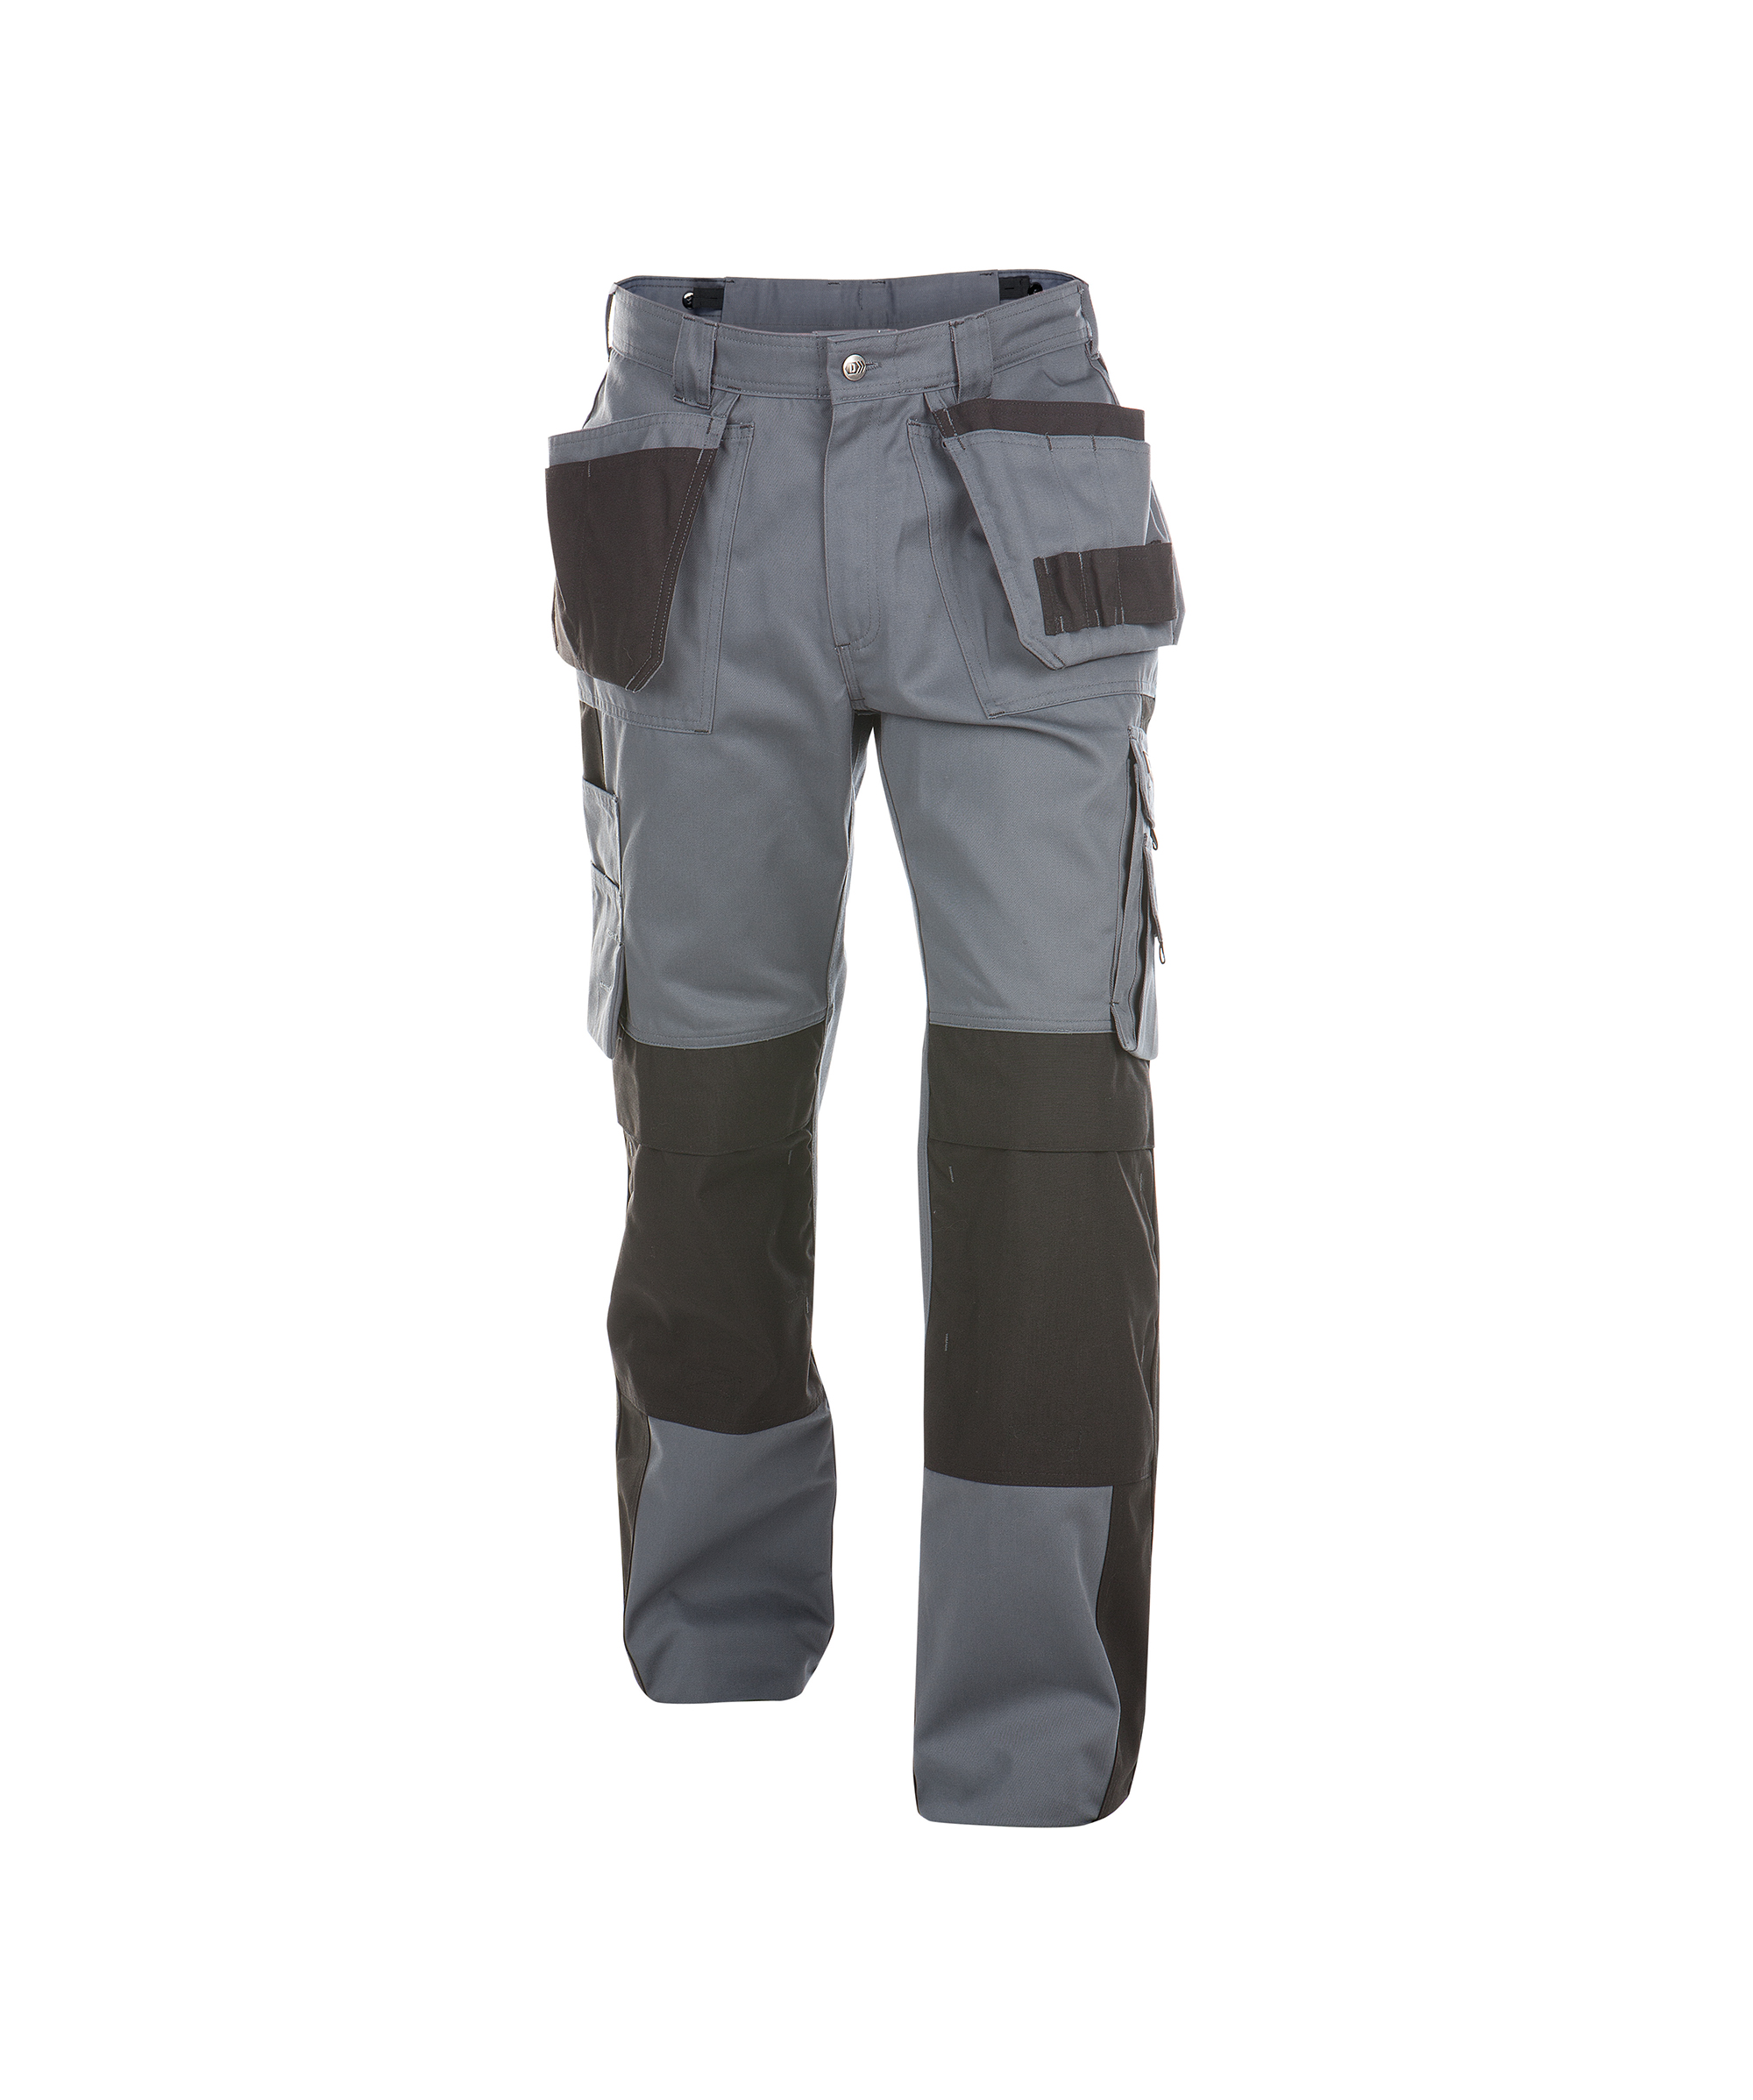 seattle_two-tone-work-trousers-with-multi-pockets-and-knee-pockets_cement-grey-black_front.jpg